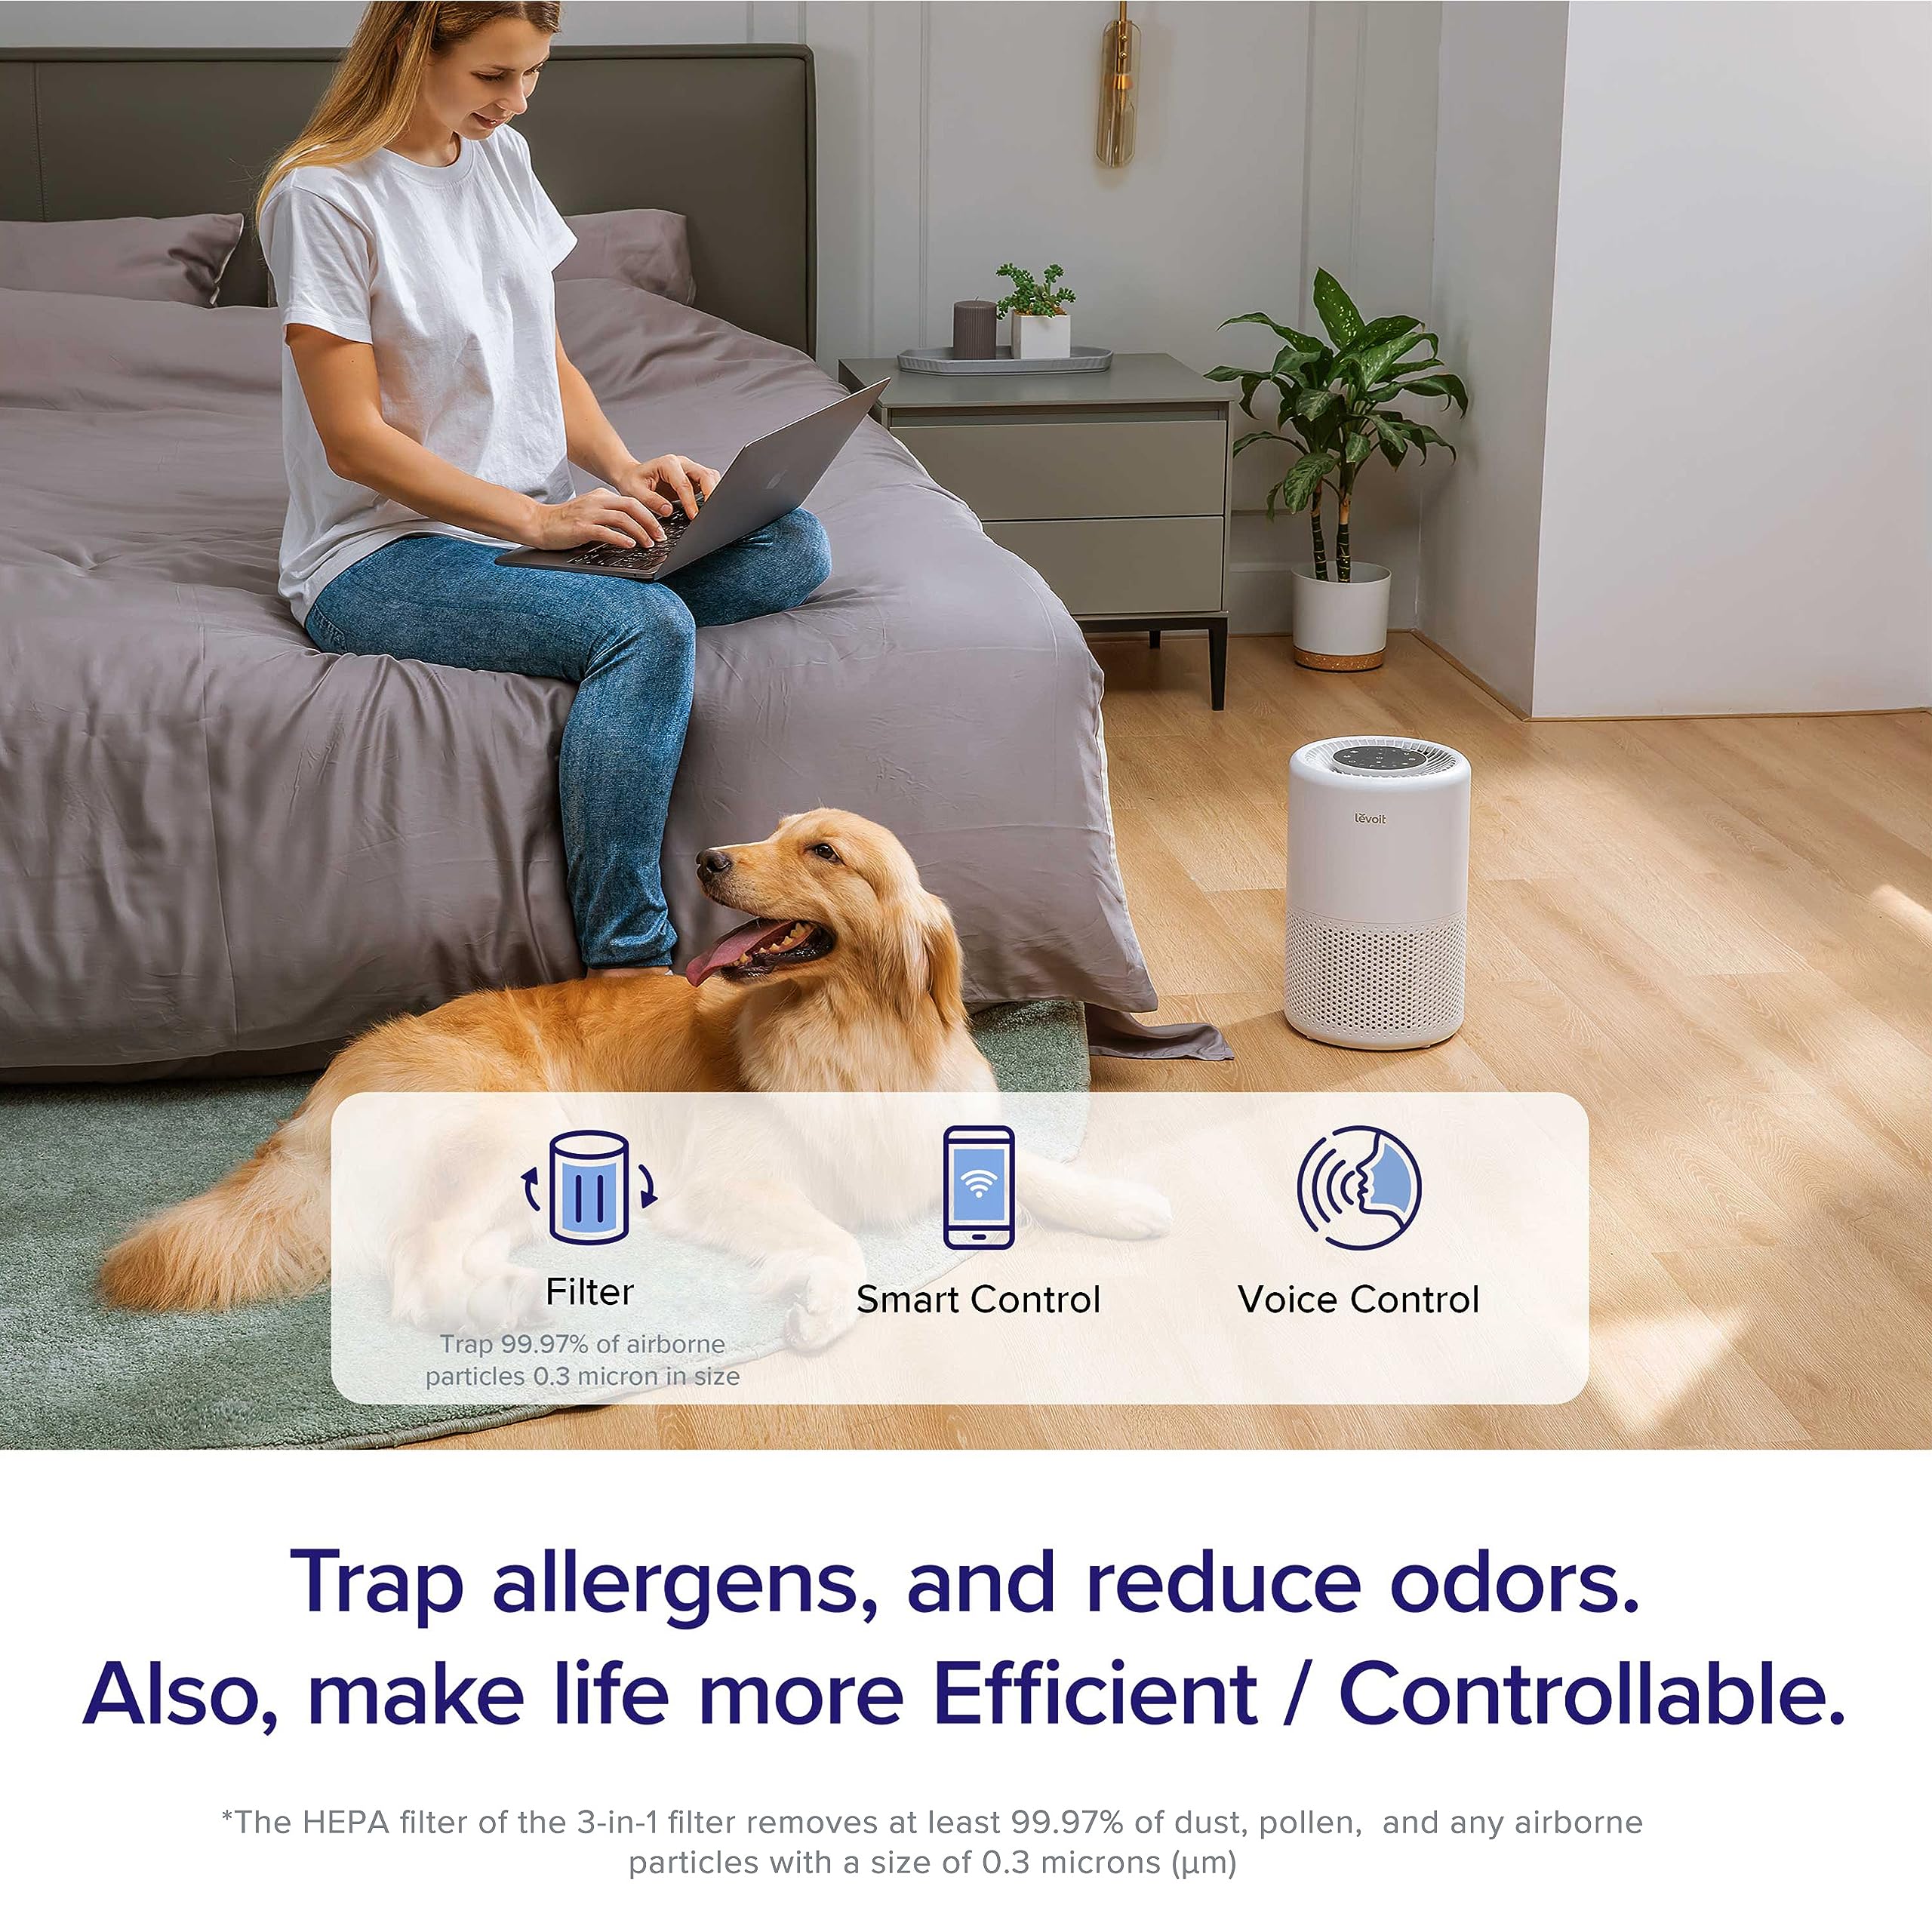 LEVOIT Air Purifier for Home Large Room, Smart WiFi Alexa Control, HEPA Filter for Allergies, Removes Pollutants, Smoke, Dust, Covers up to 915 Sq.Foot, 24dB Quiet for Bedroom, Core 200S, White